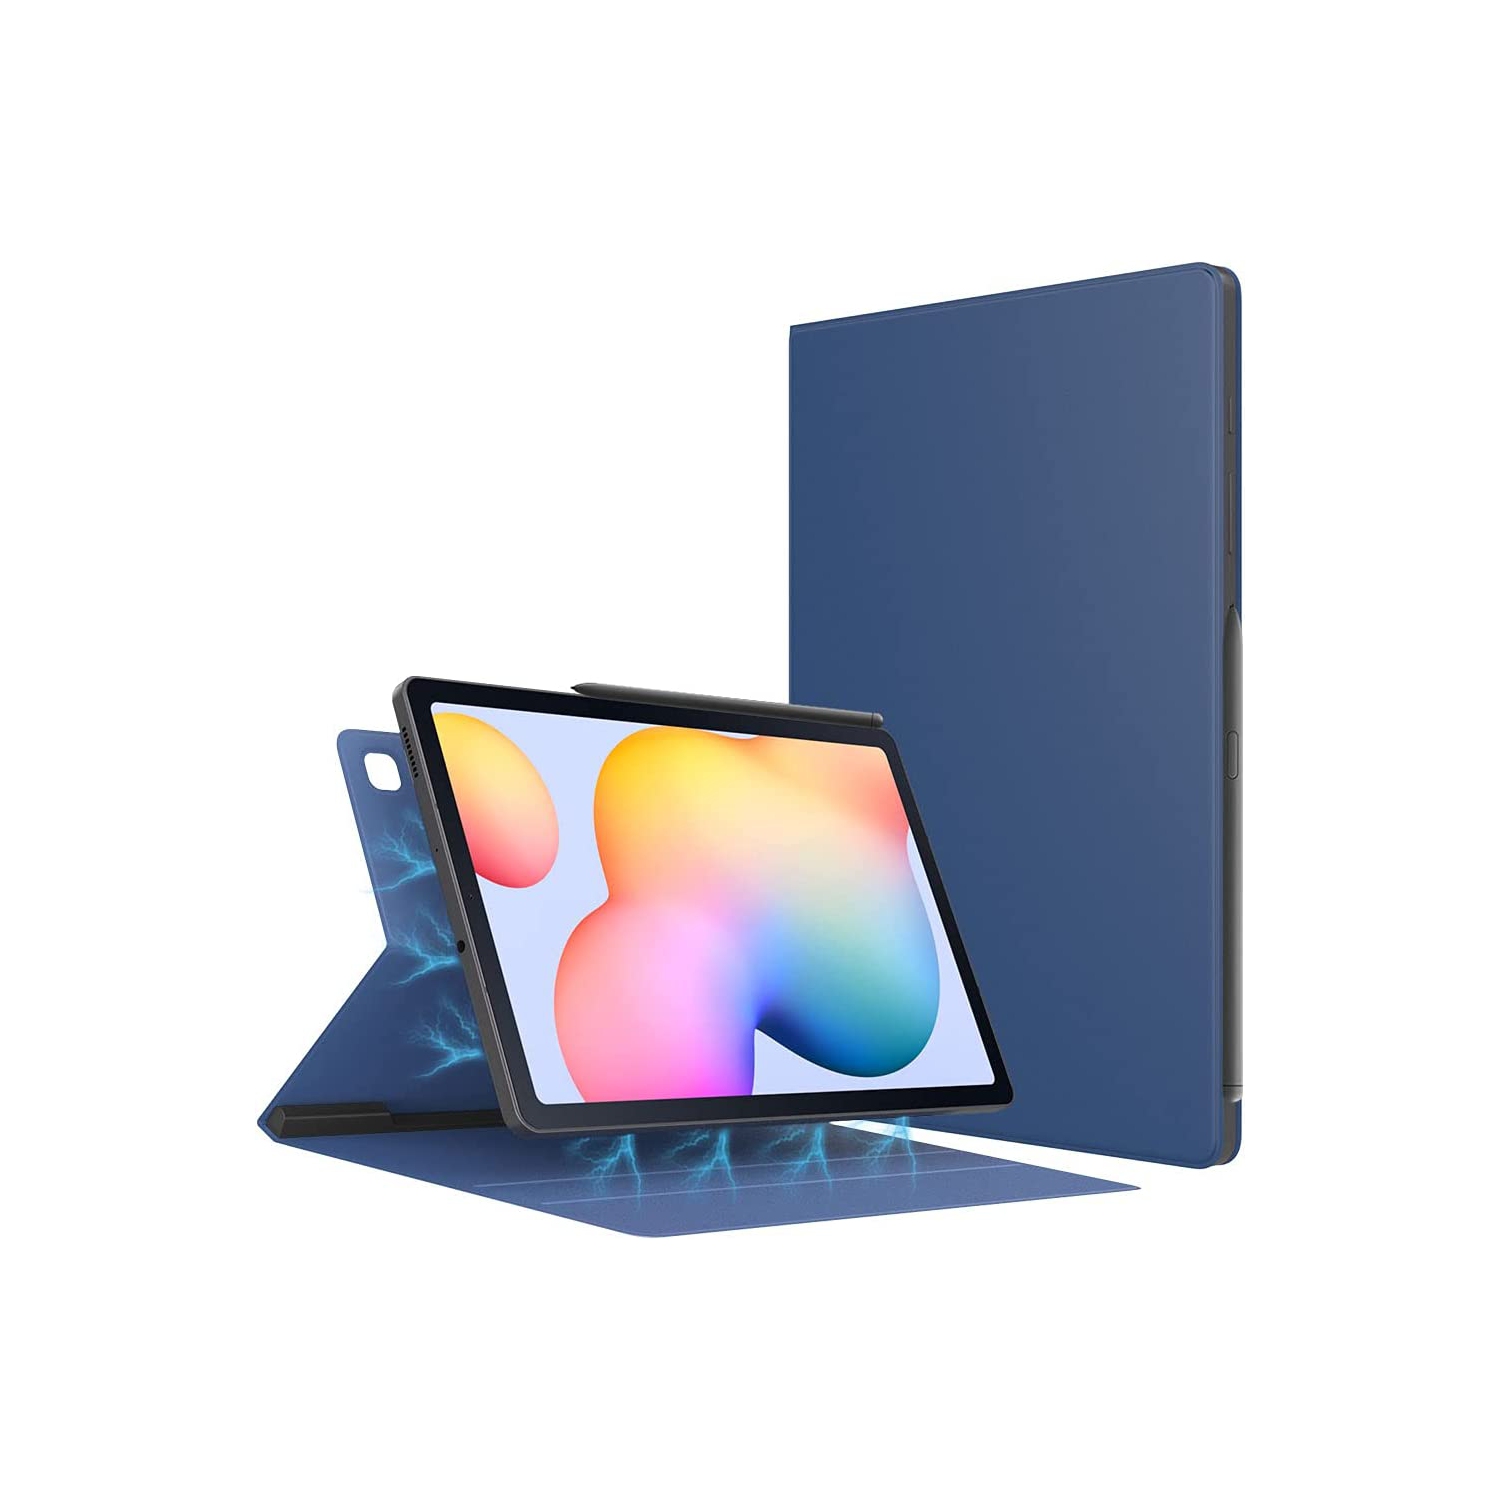 T Case for All-New Samsung Galaxy Tab S6 Lite 10.4 Inch 2022/2020 (SM-P610/P615/P613/P619), Ultra Slim Lightweight Magnetic Stand Cover Fit Galaxy Tab S6 Lite 2022/2020 Tablet, Nav